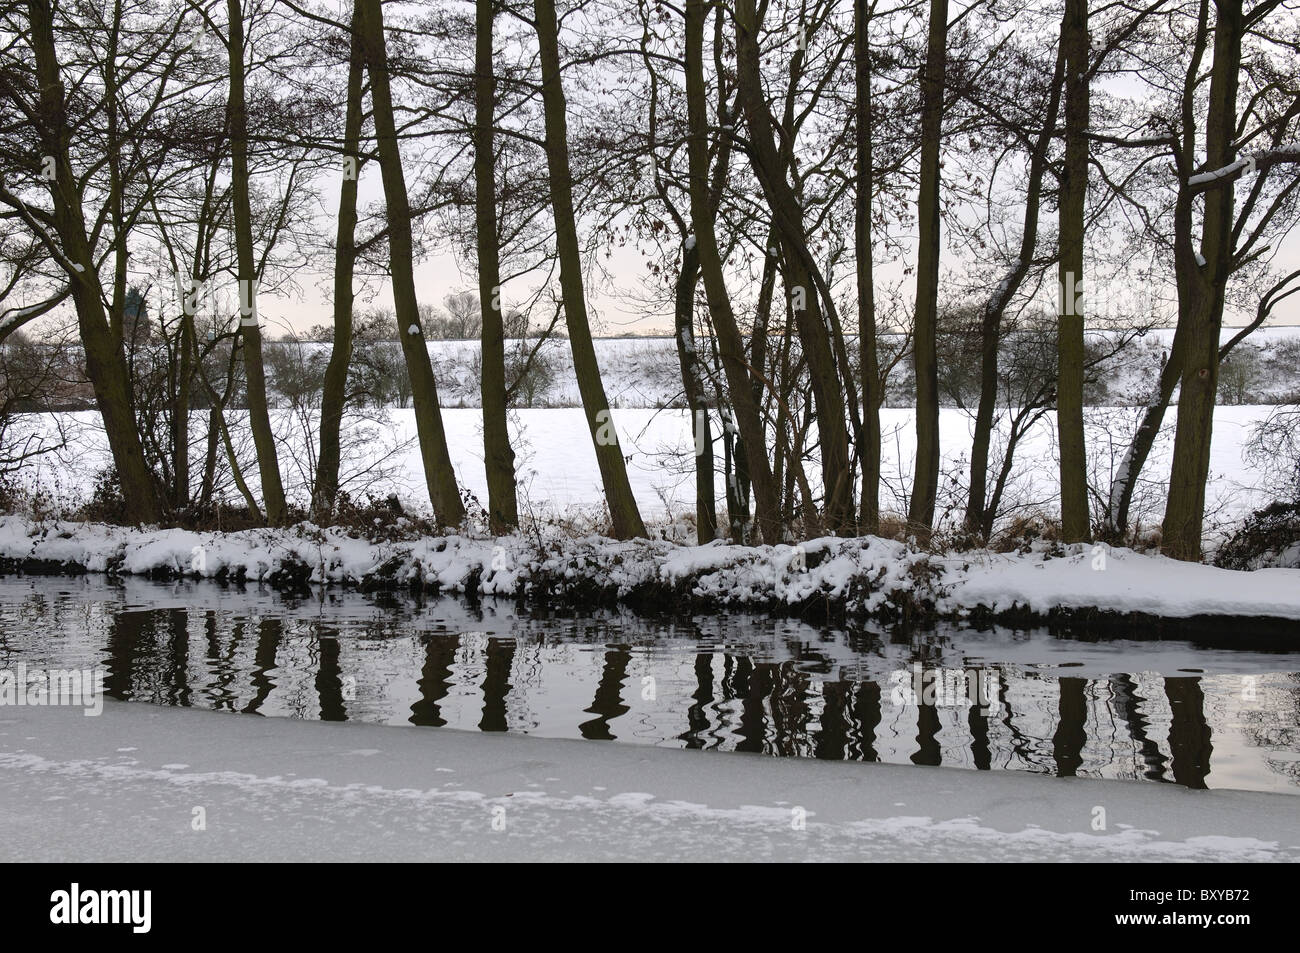 Alder trees by Grand Union Canal in winter with snow, Warwickshire, UK Stock Photo